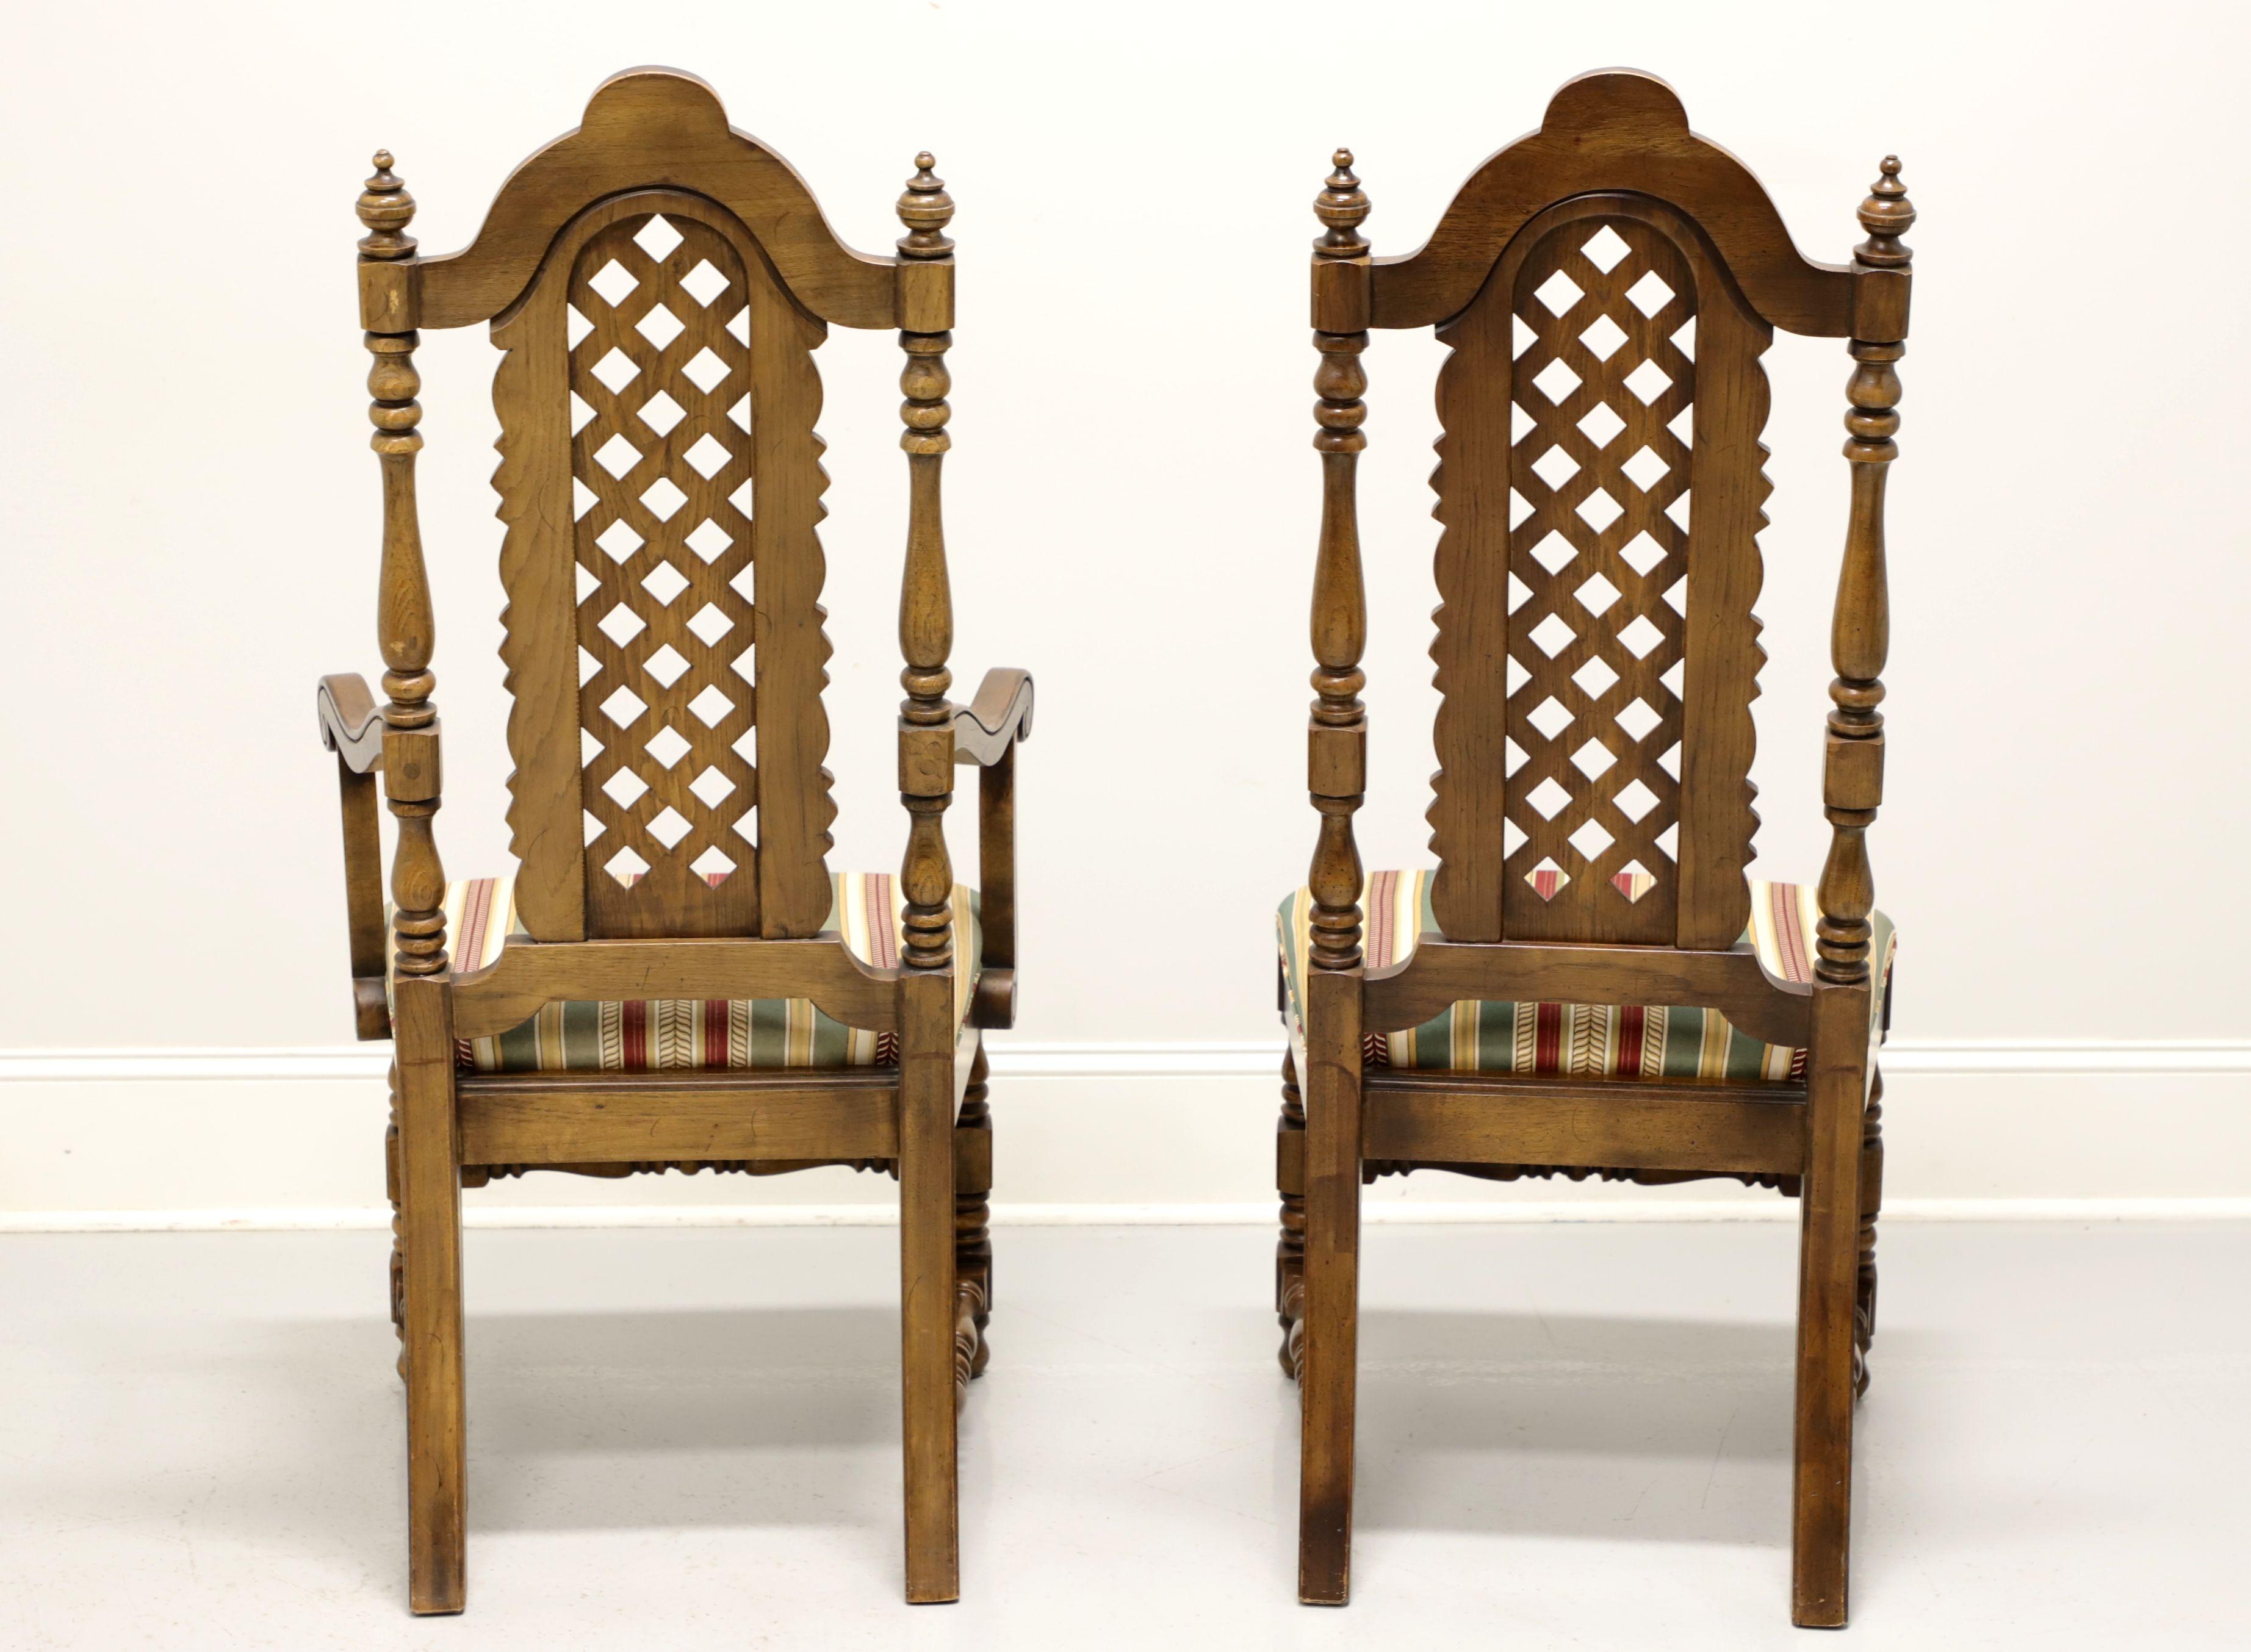 American Mid 20th Century Walnut Spanish Baroque Style Dining Chairs - Set of 6 For Sale